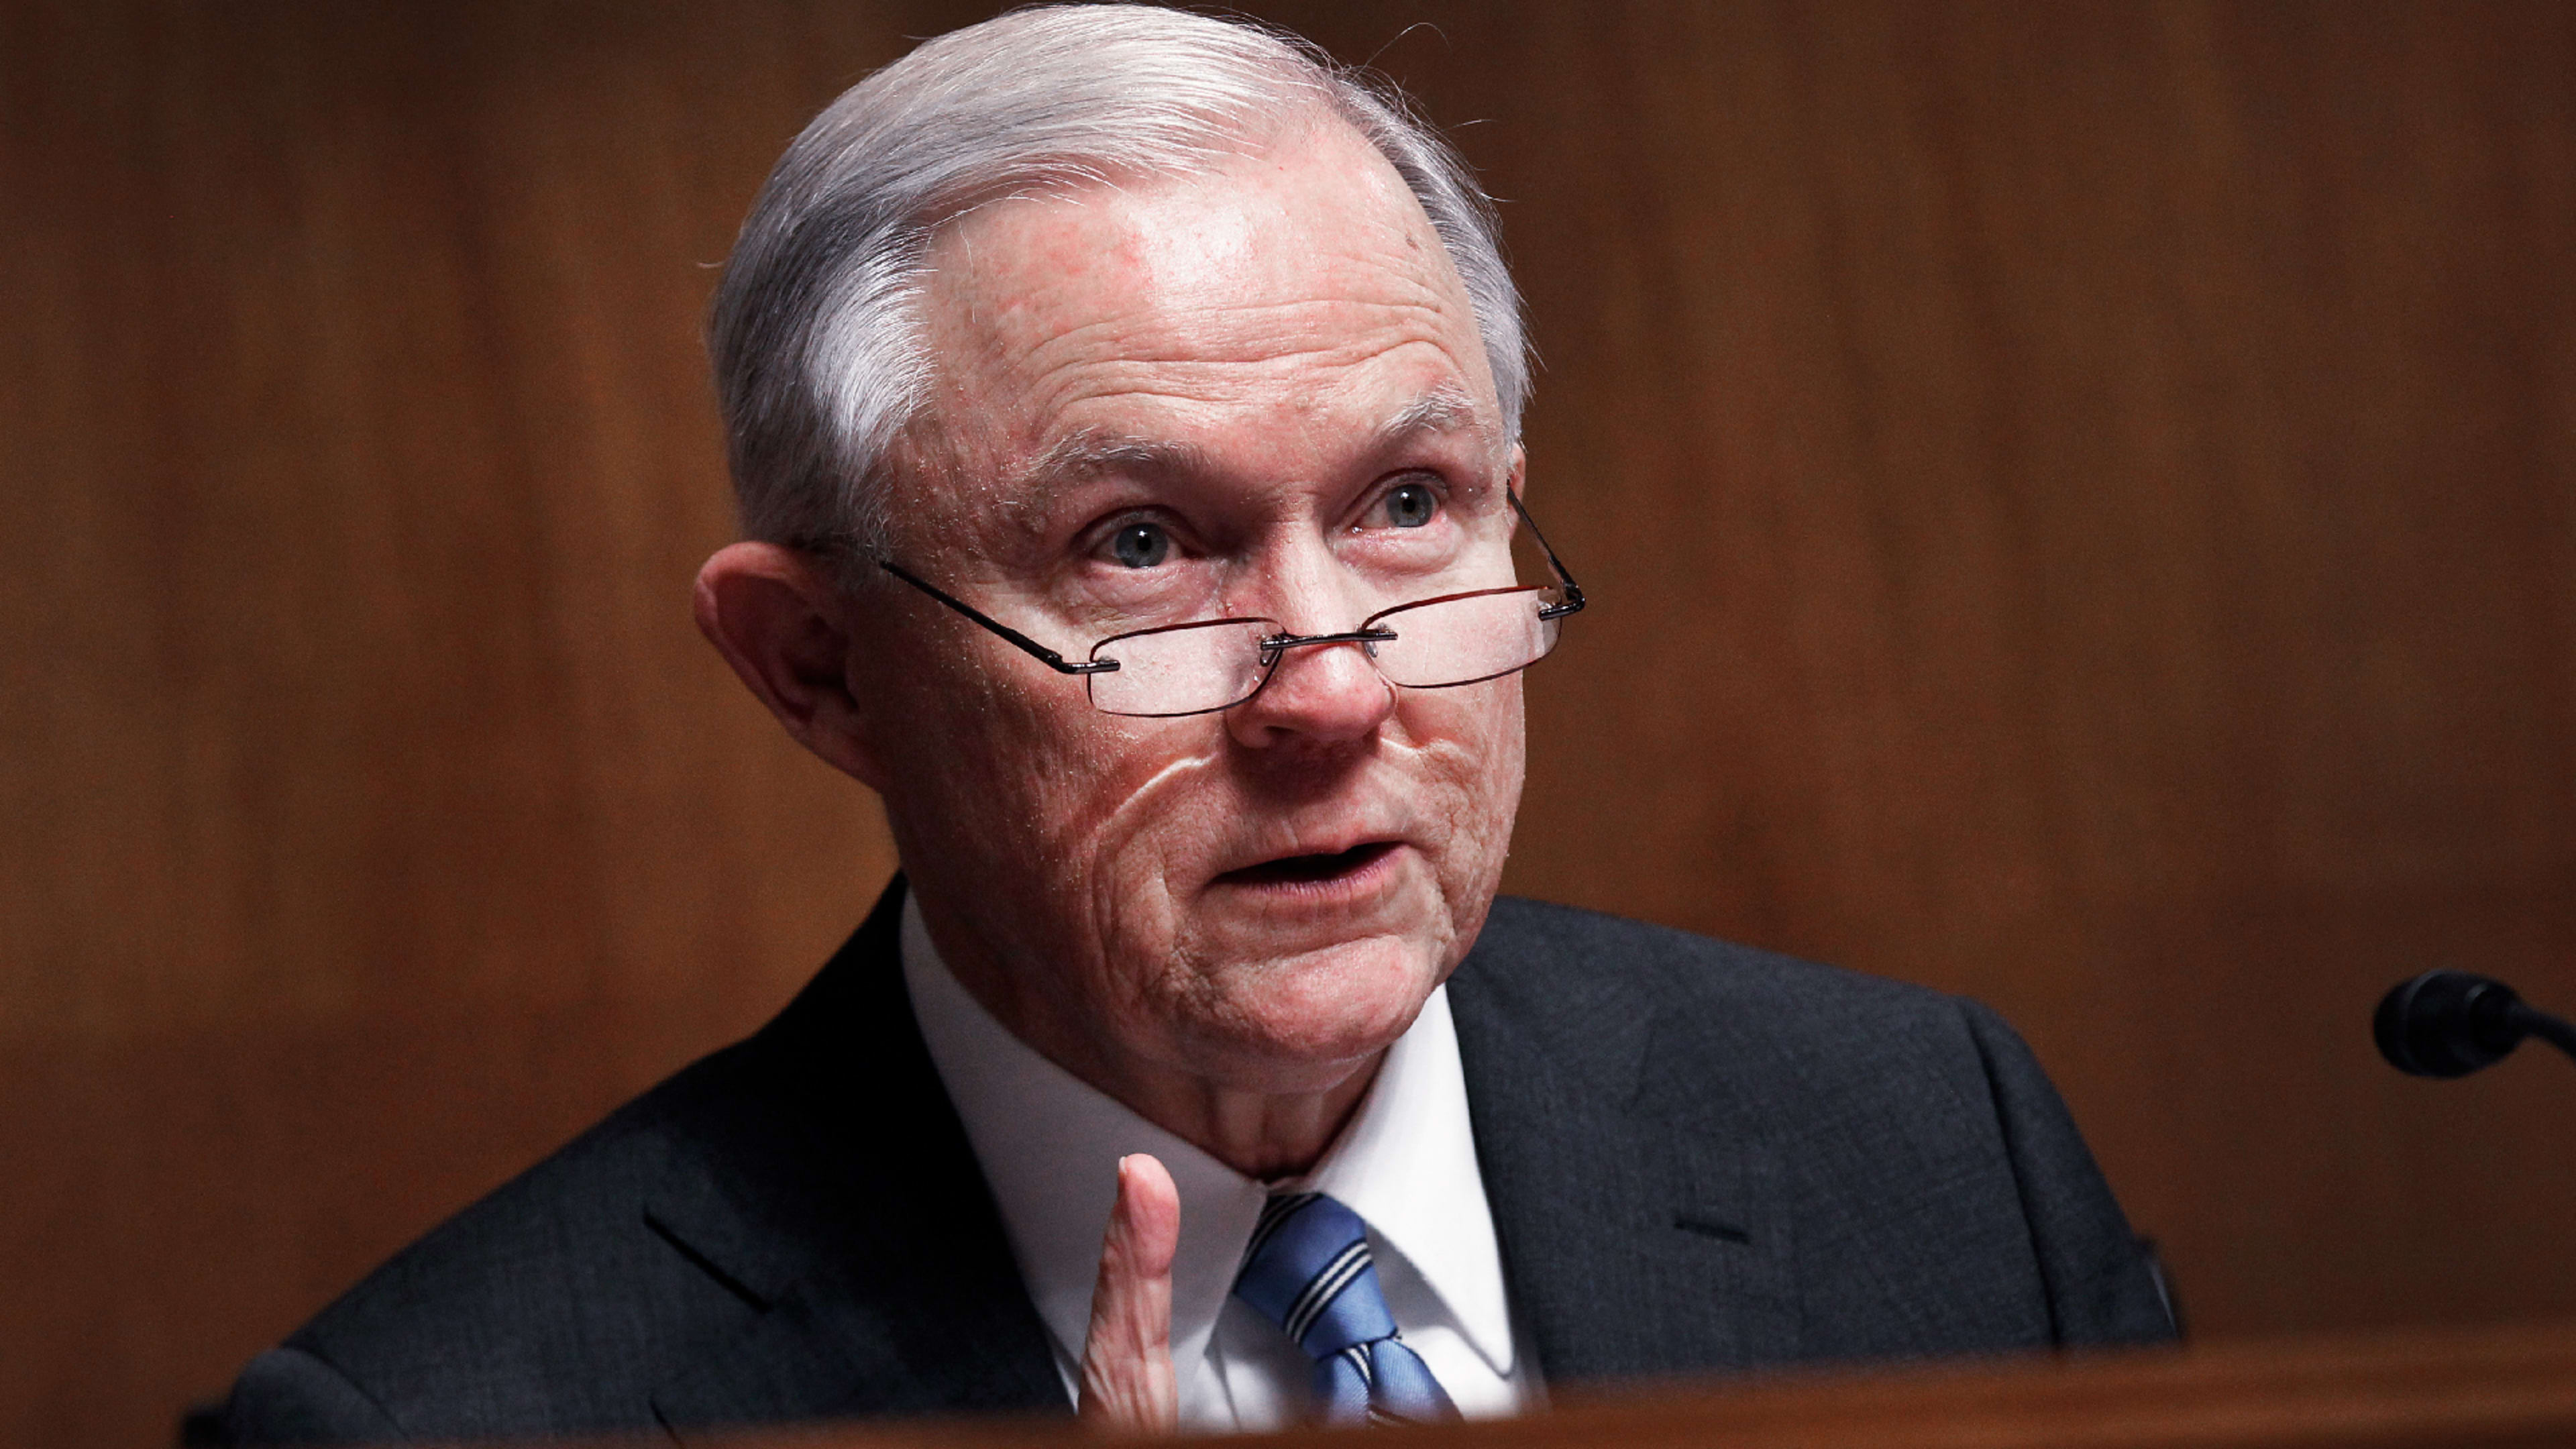 Jeff Sessions gets pushed out as attorney general less than 24 hours after the election